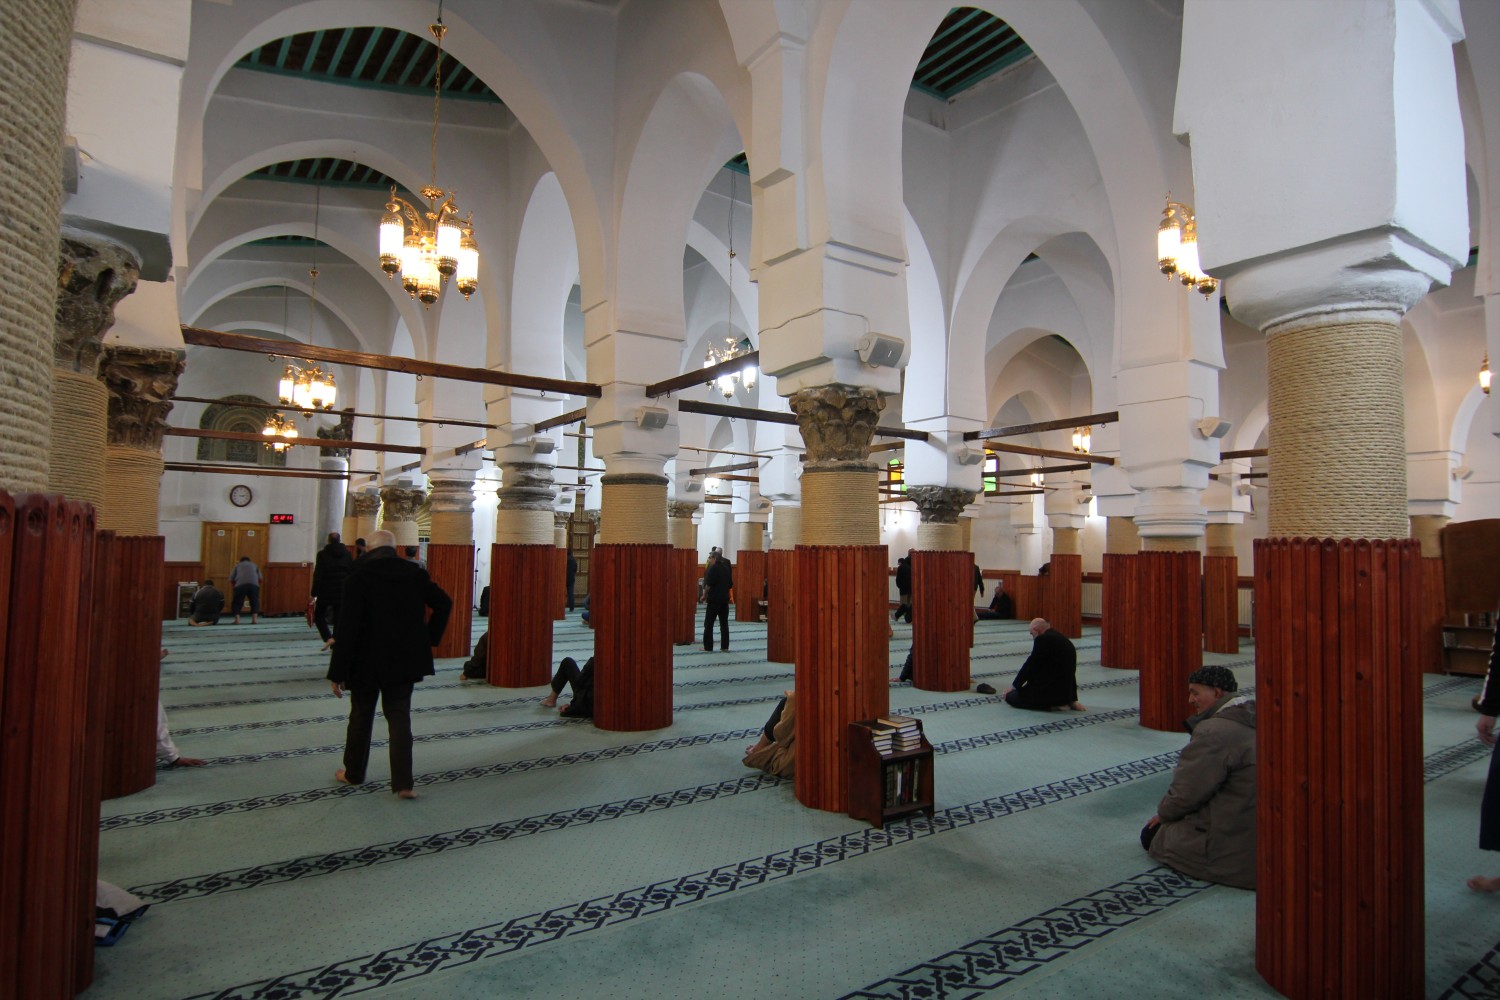 View of the prayer hall showing pointed arches maintained by wooden rods